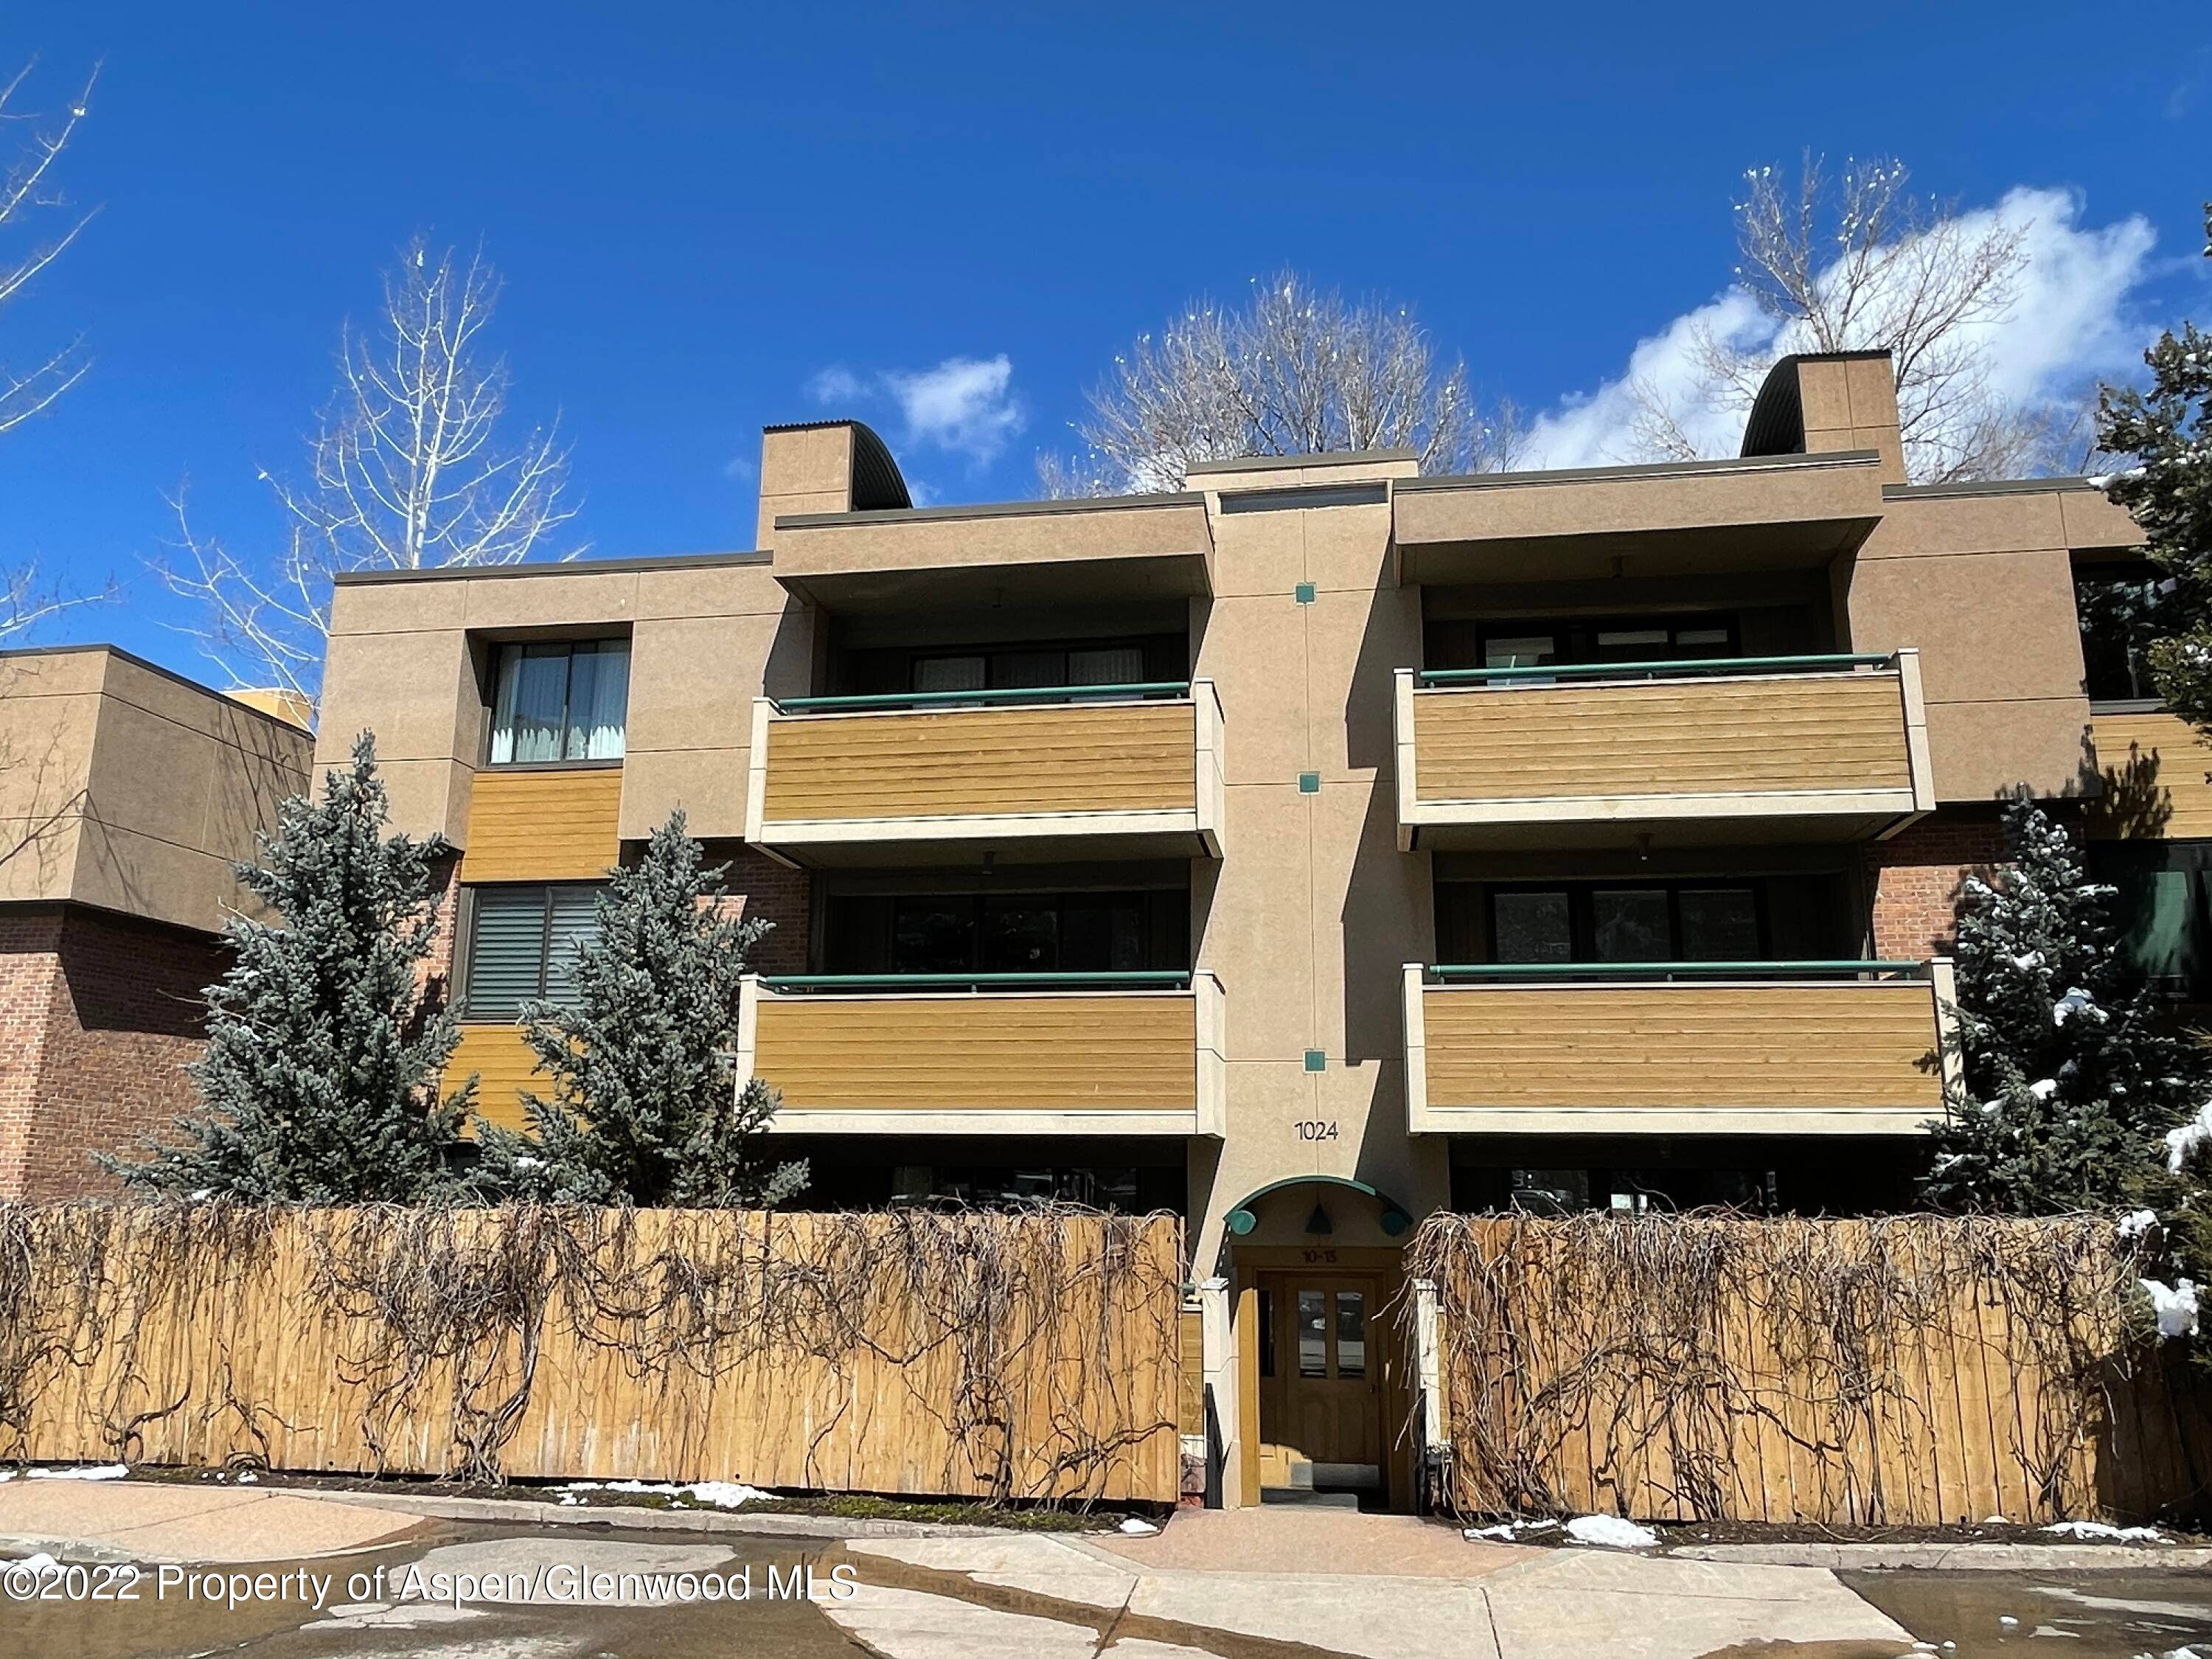 A top floor, corner unit, right on the river in Aspen is difficult to beat.